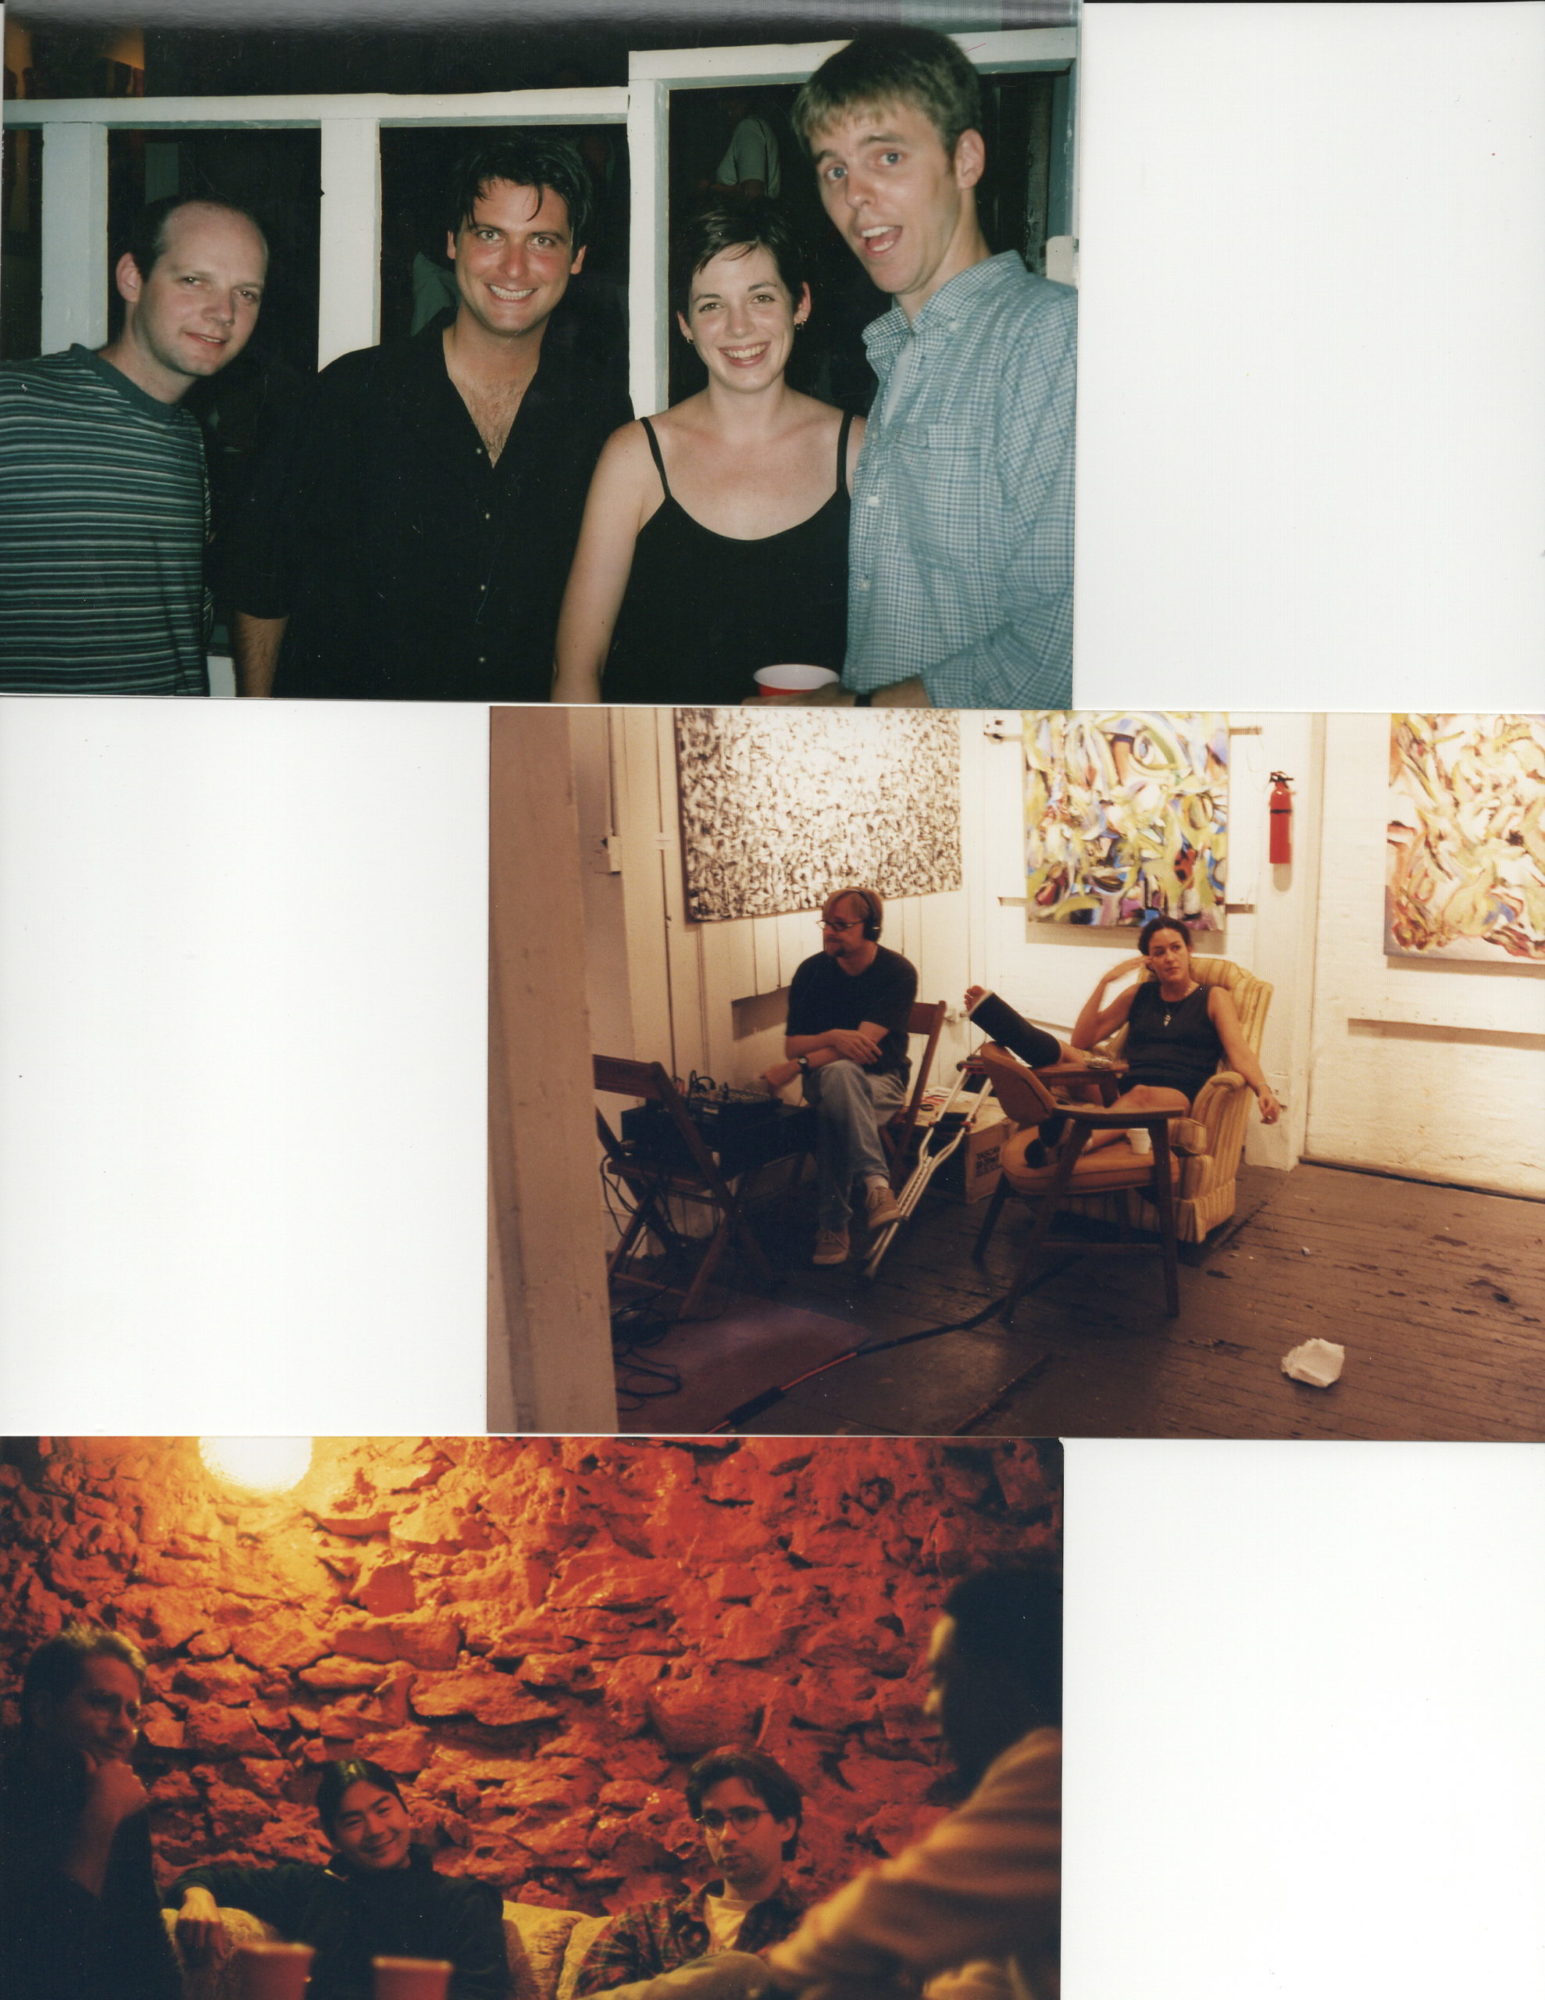 A collection of three photographs. In the top photo, four individuals are standing and smiling. In the middle photograph, two individuals sit in folding chairs with art behind them. The bottom most image includes four individuals sitting in front of a burnt orange wall.